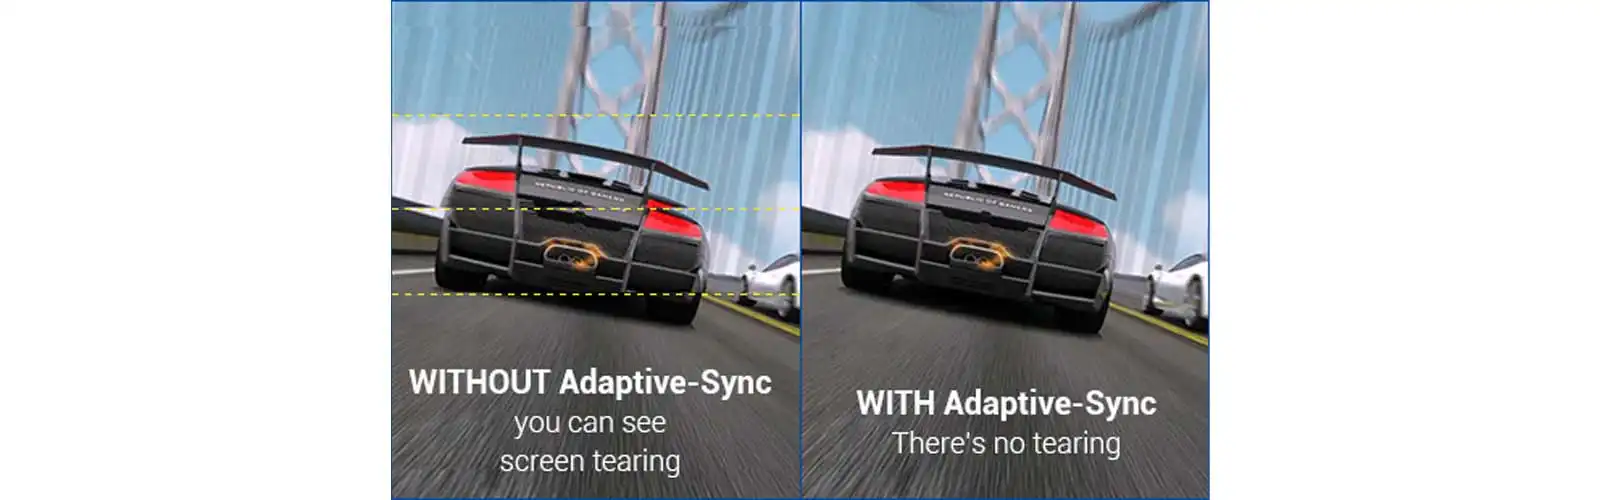 Adaptive-Sync technology for smooth gameplay